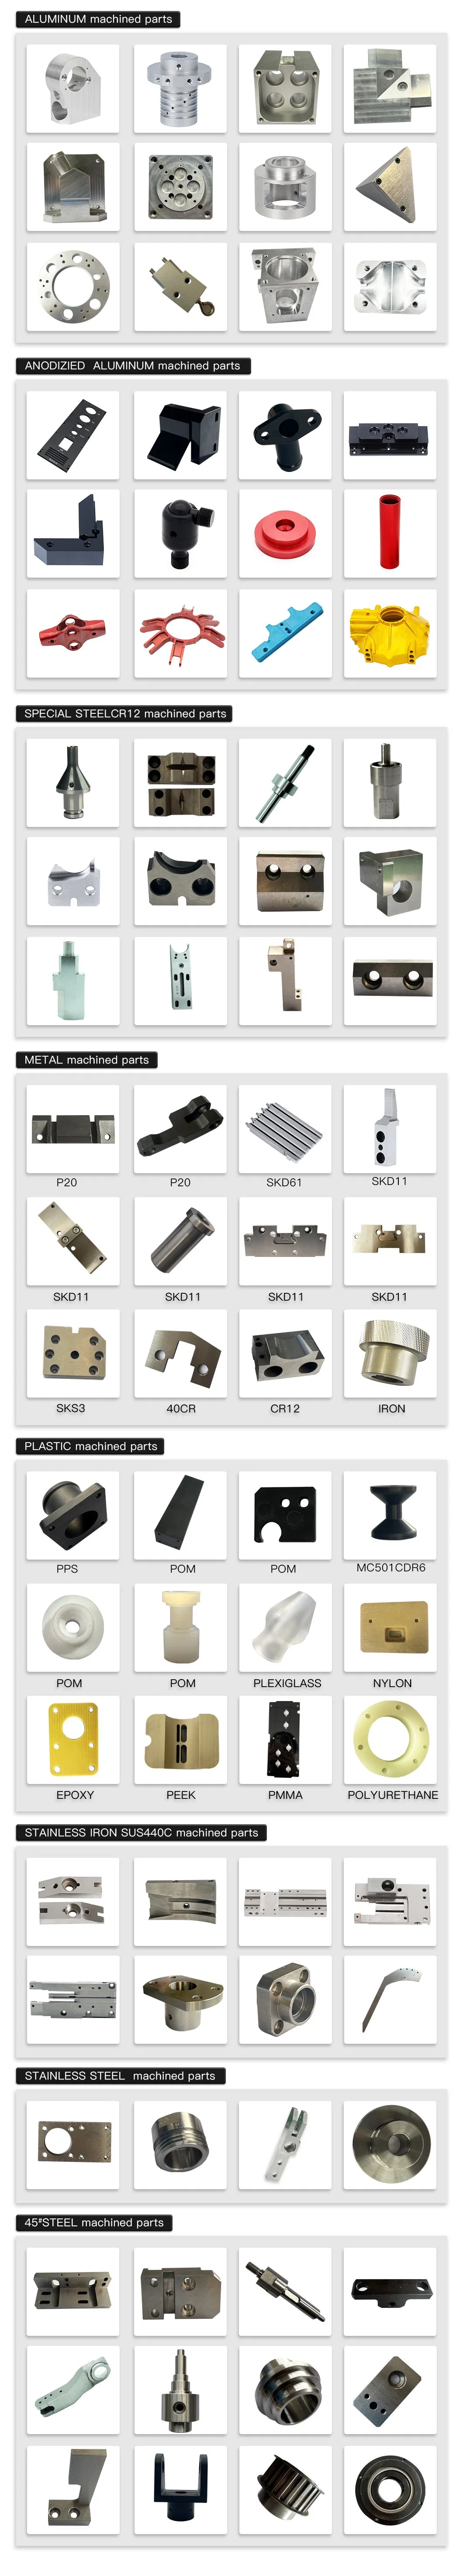 Non Standard Customized Metal Prcessing CNC Machinery Parts